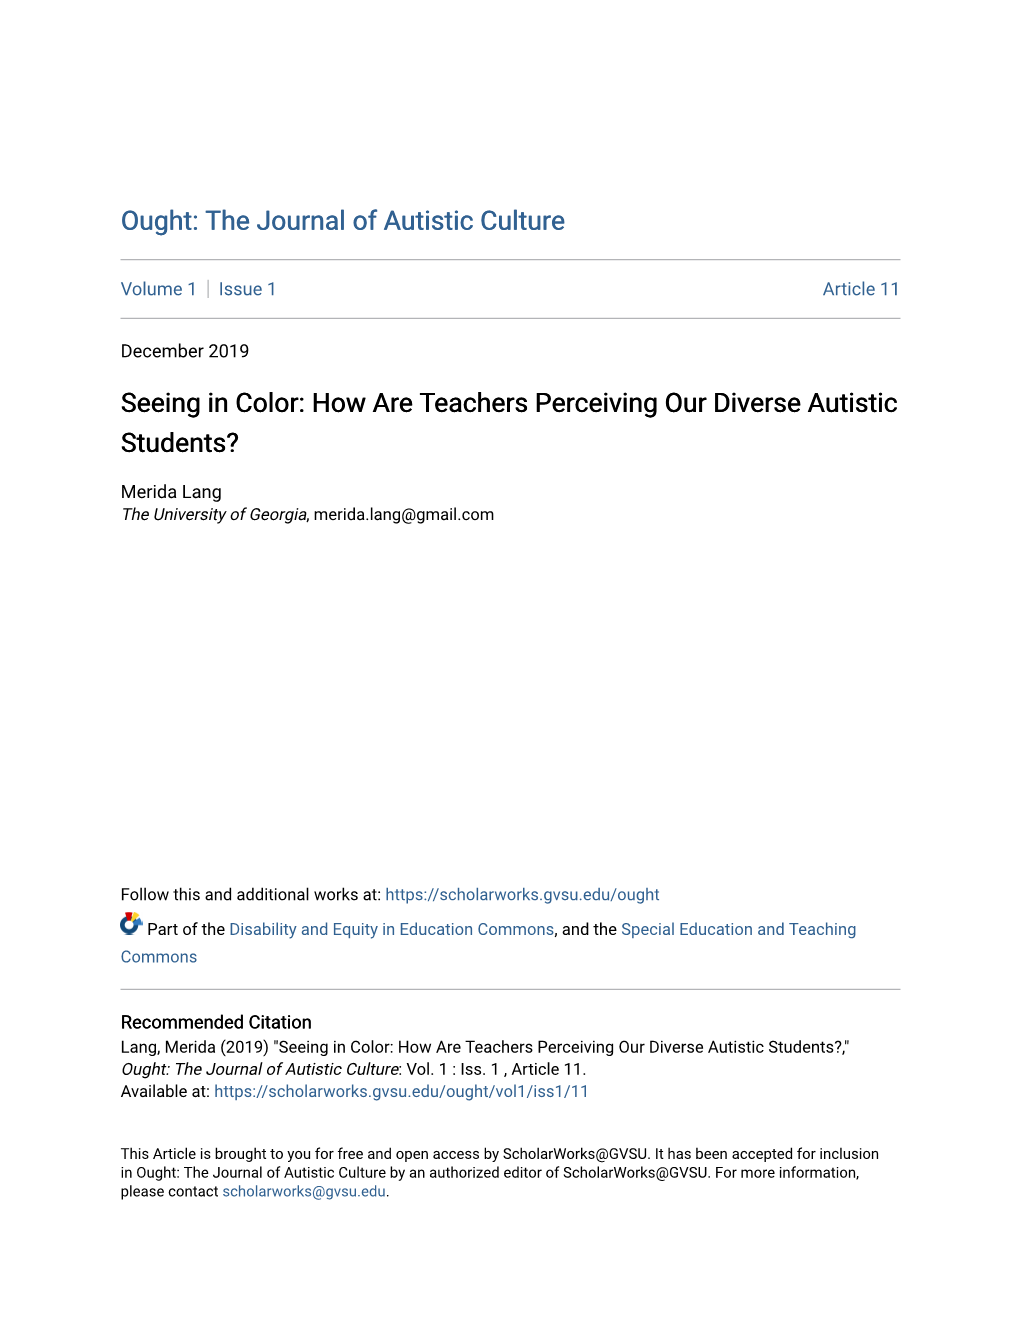 How Are Teachers Perceiving Our Diverse Autistic Students?